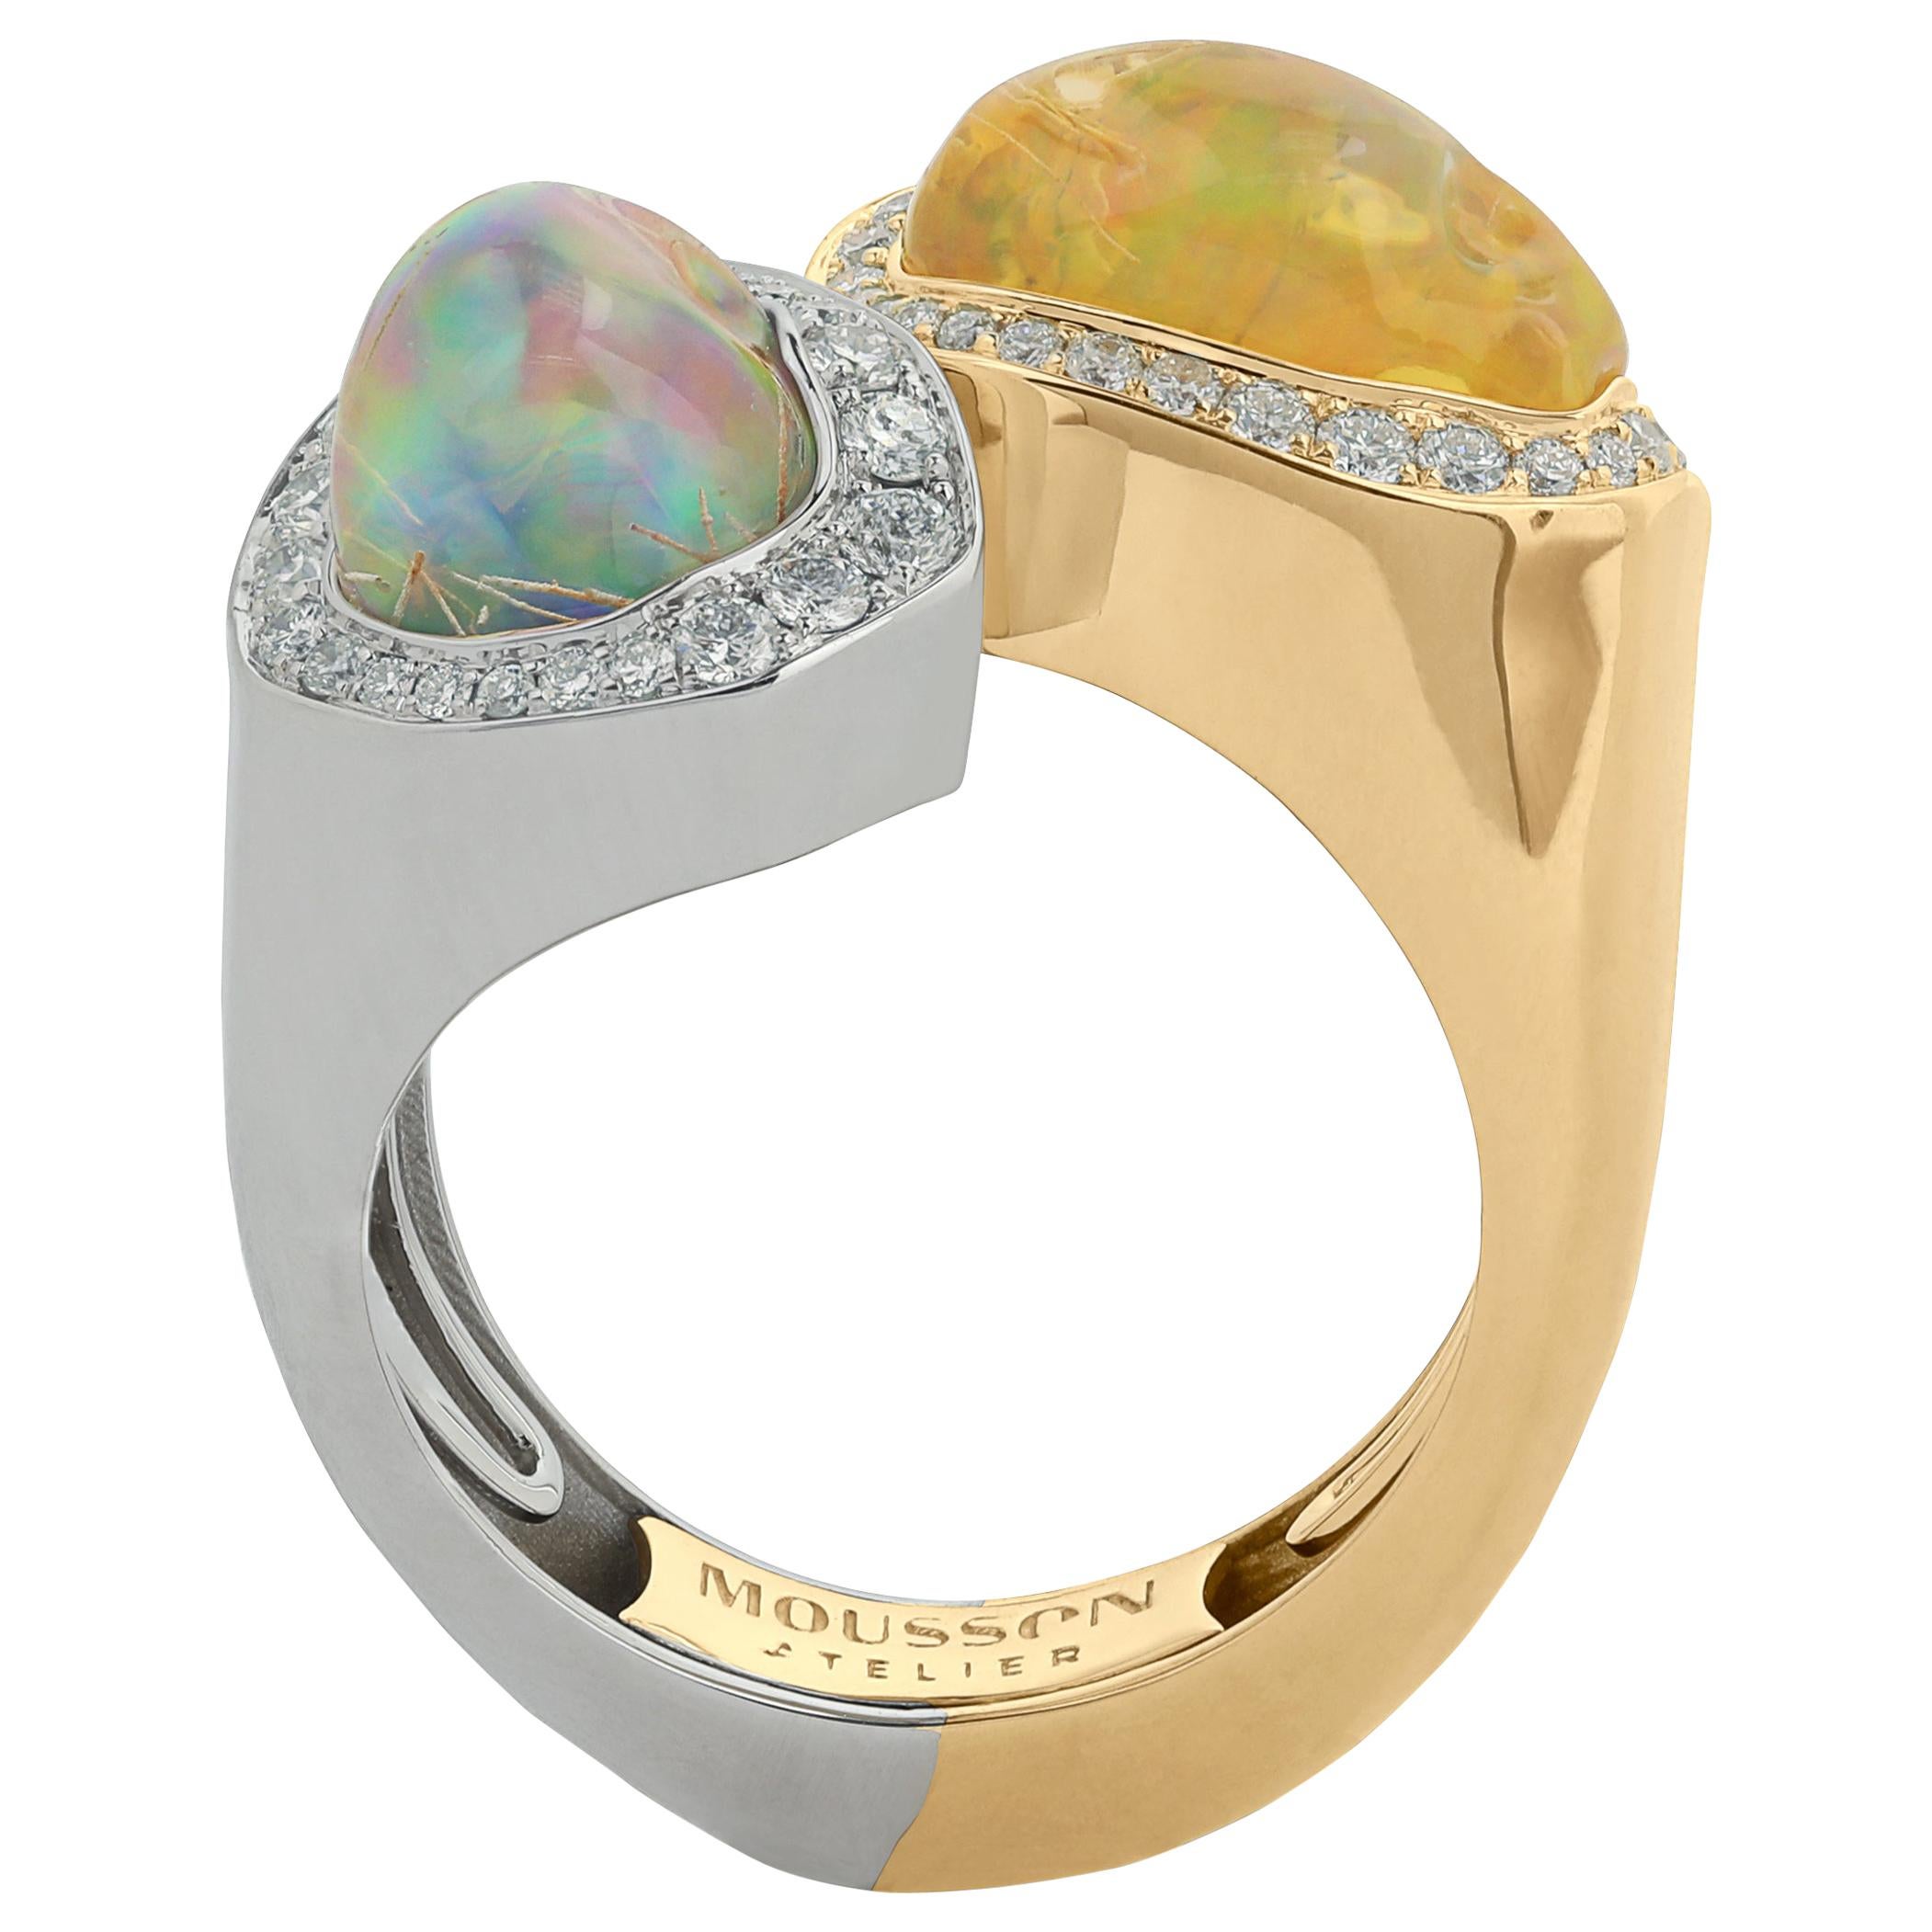 Mexican Opal 5.84 Carat Diamonds One of a Kind 18 Karat Yellow White Gold Ring